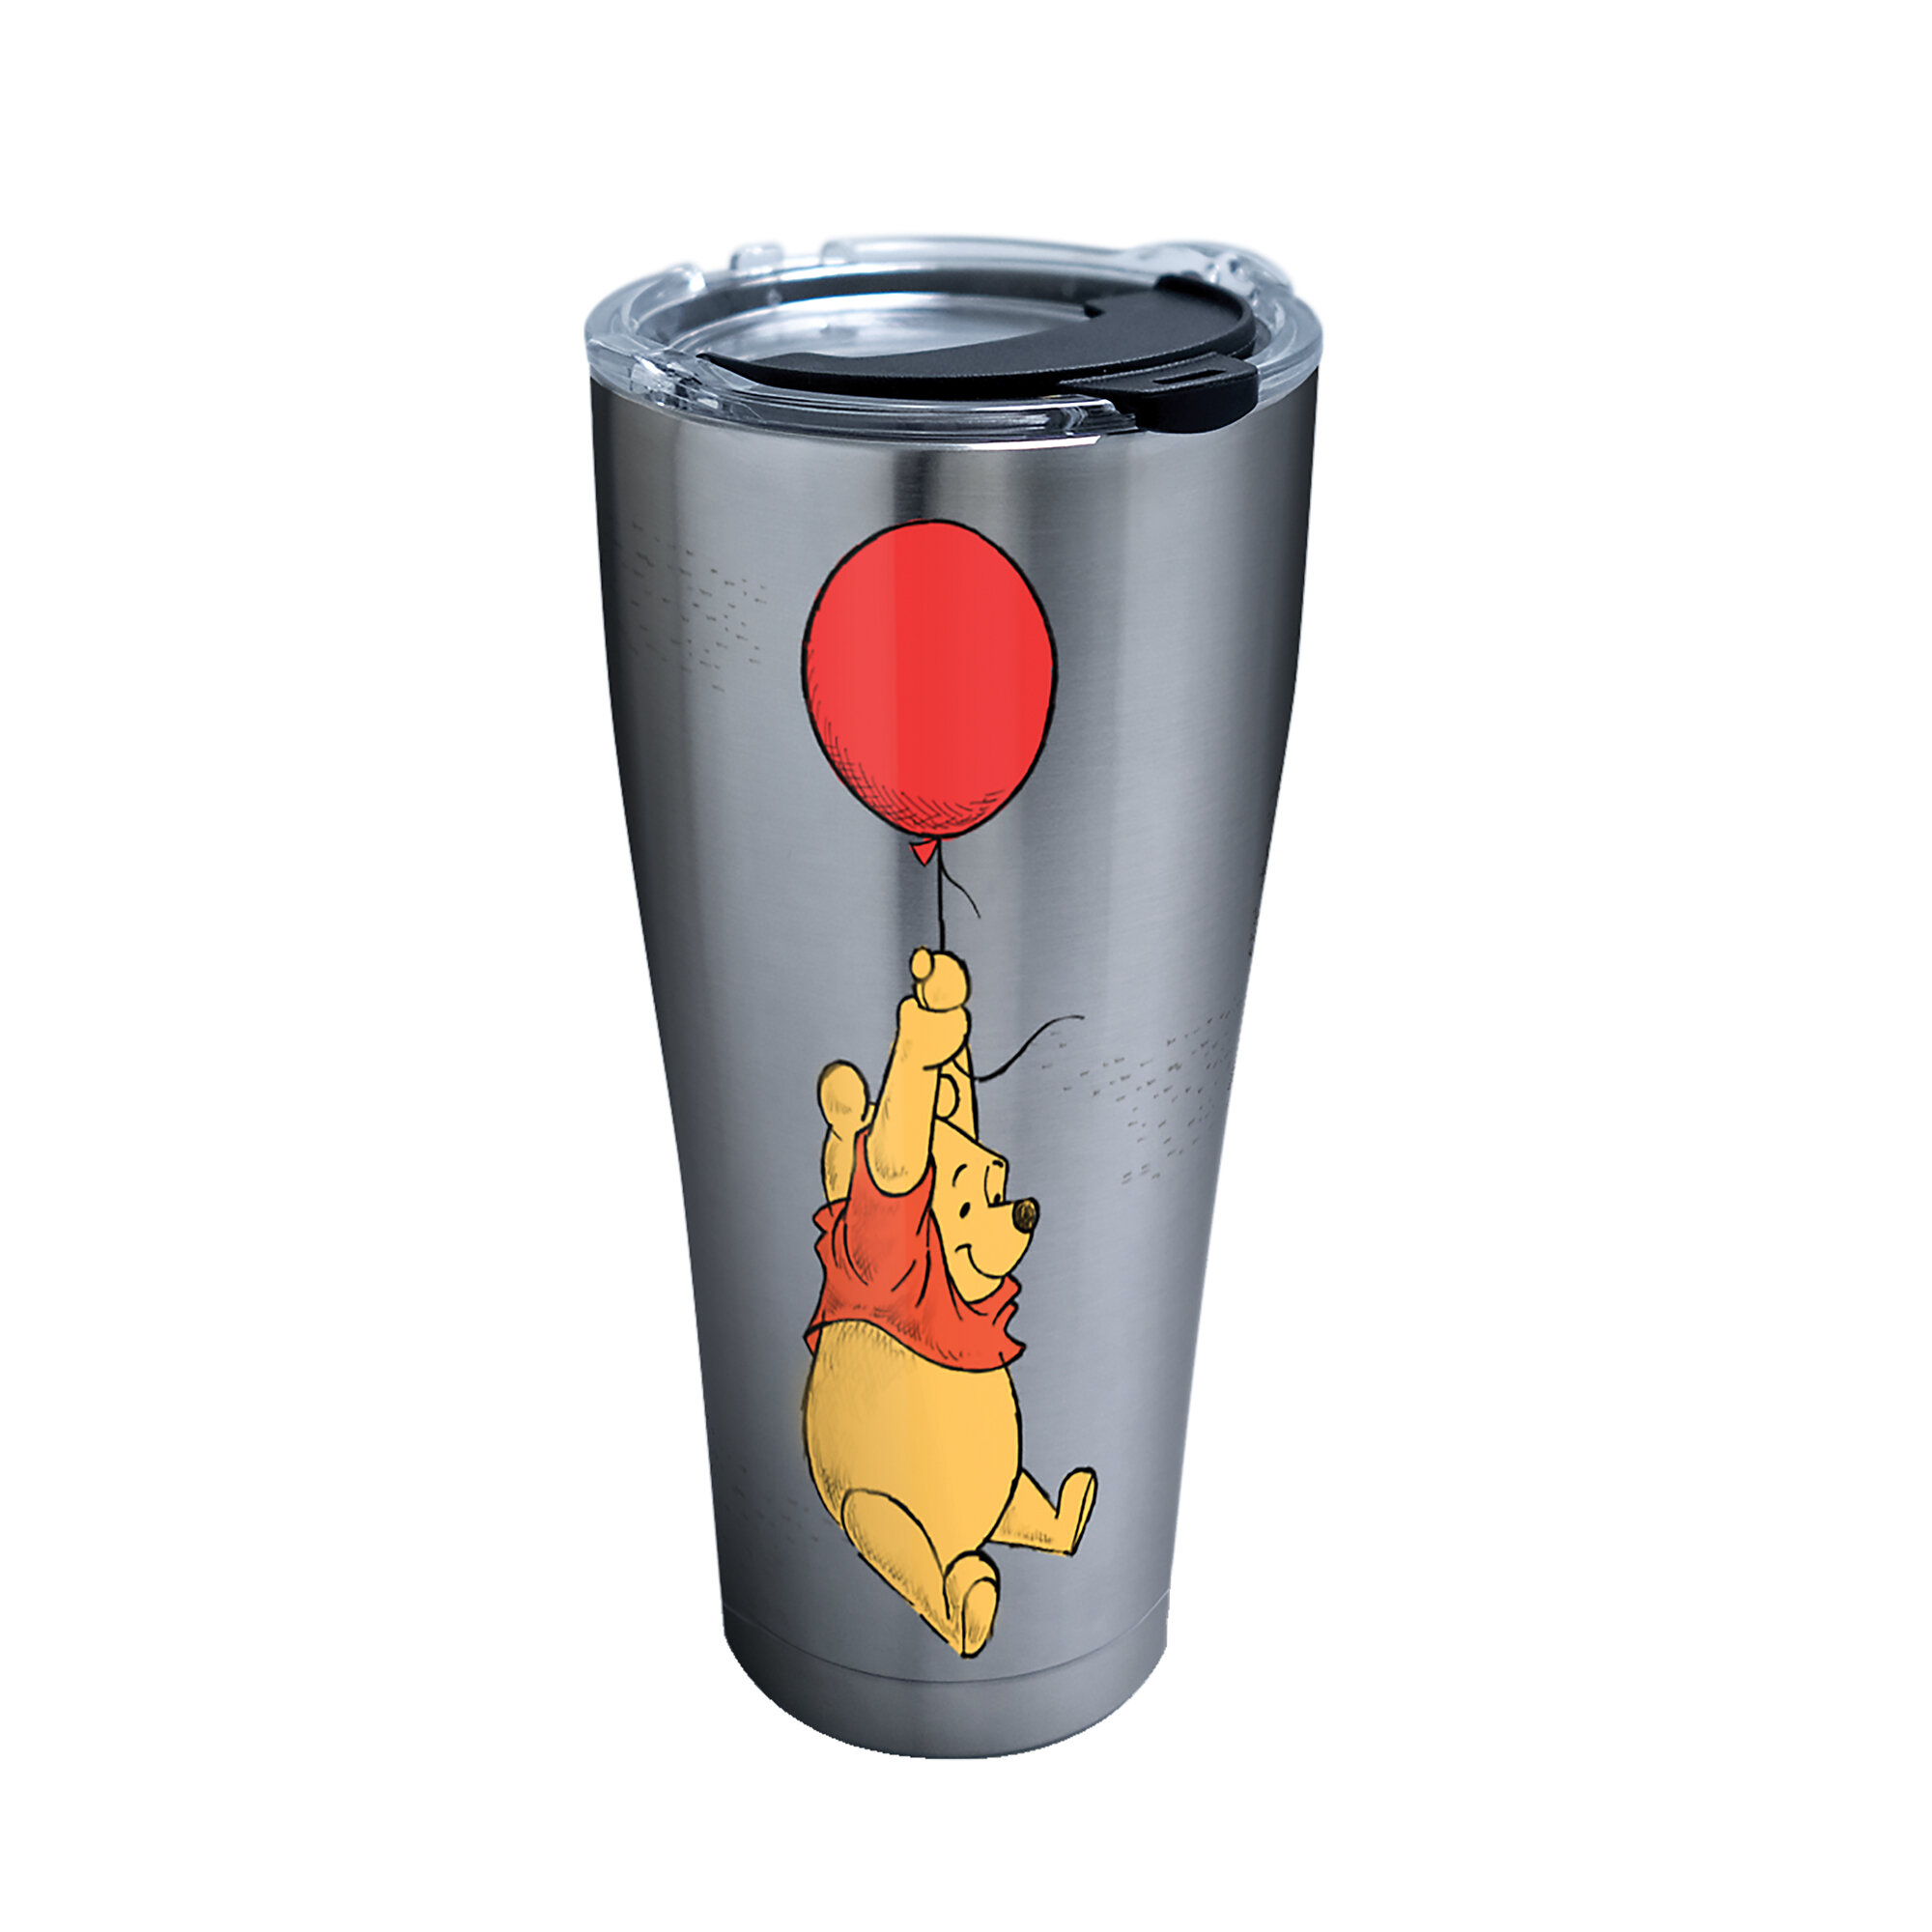 Details about   Winnie The Pooh Tervis Tumbler 16Oz As Soon As I Saw You I Knew an Adventure NEW 